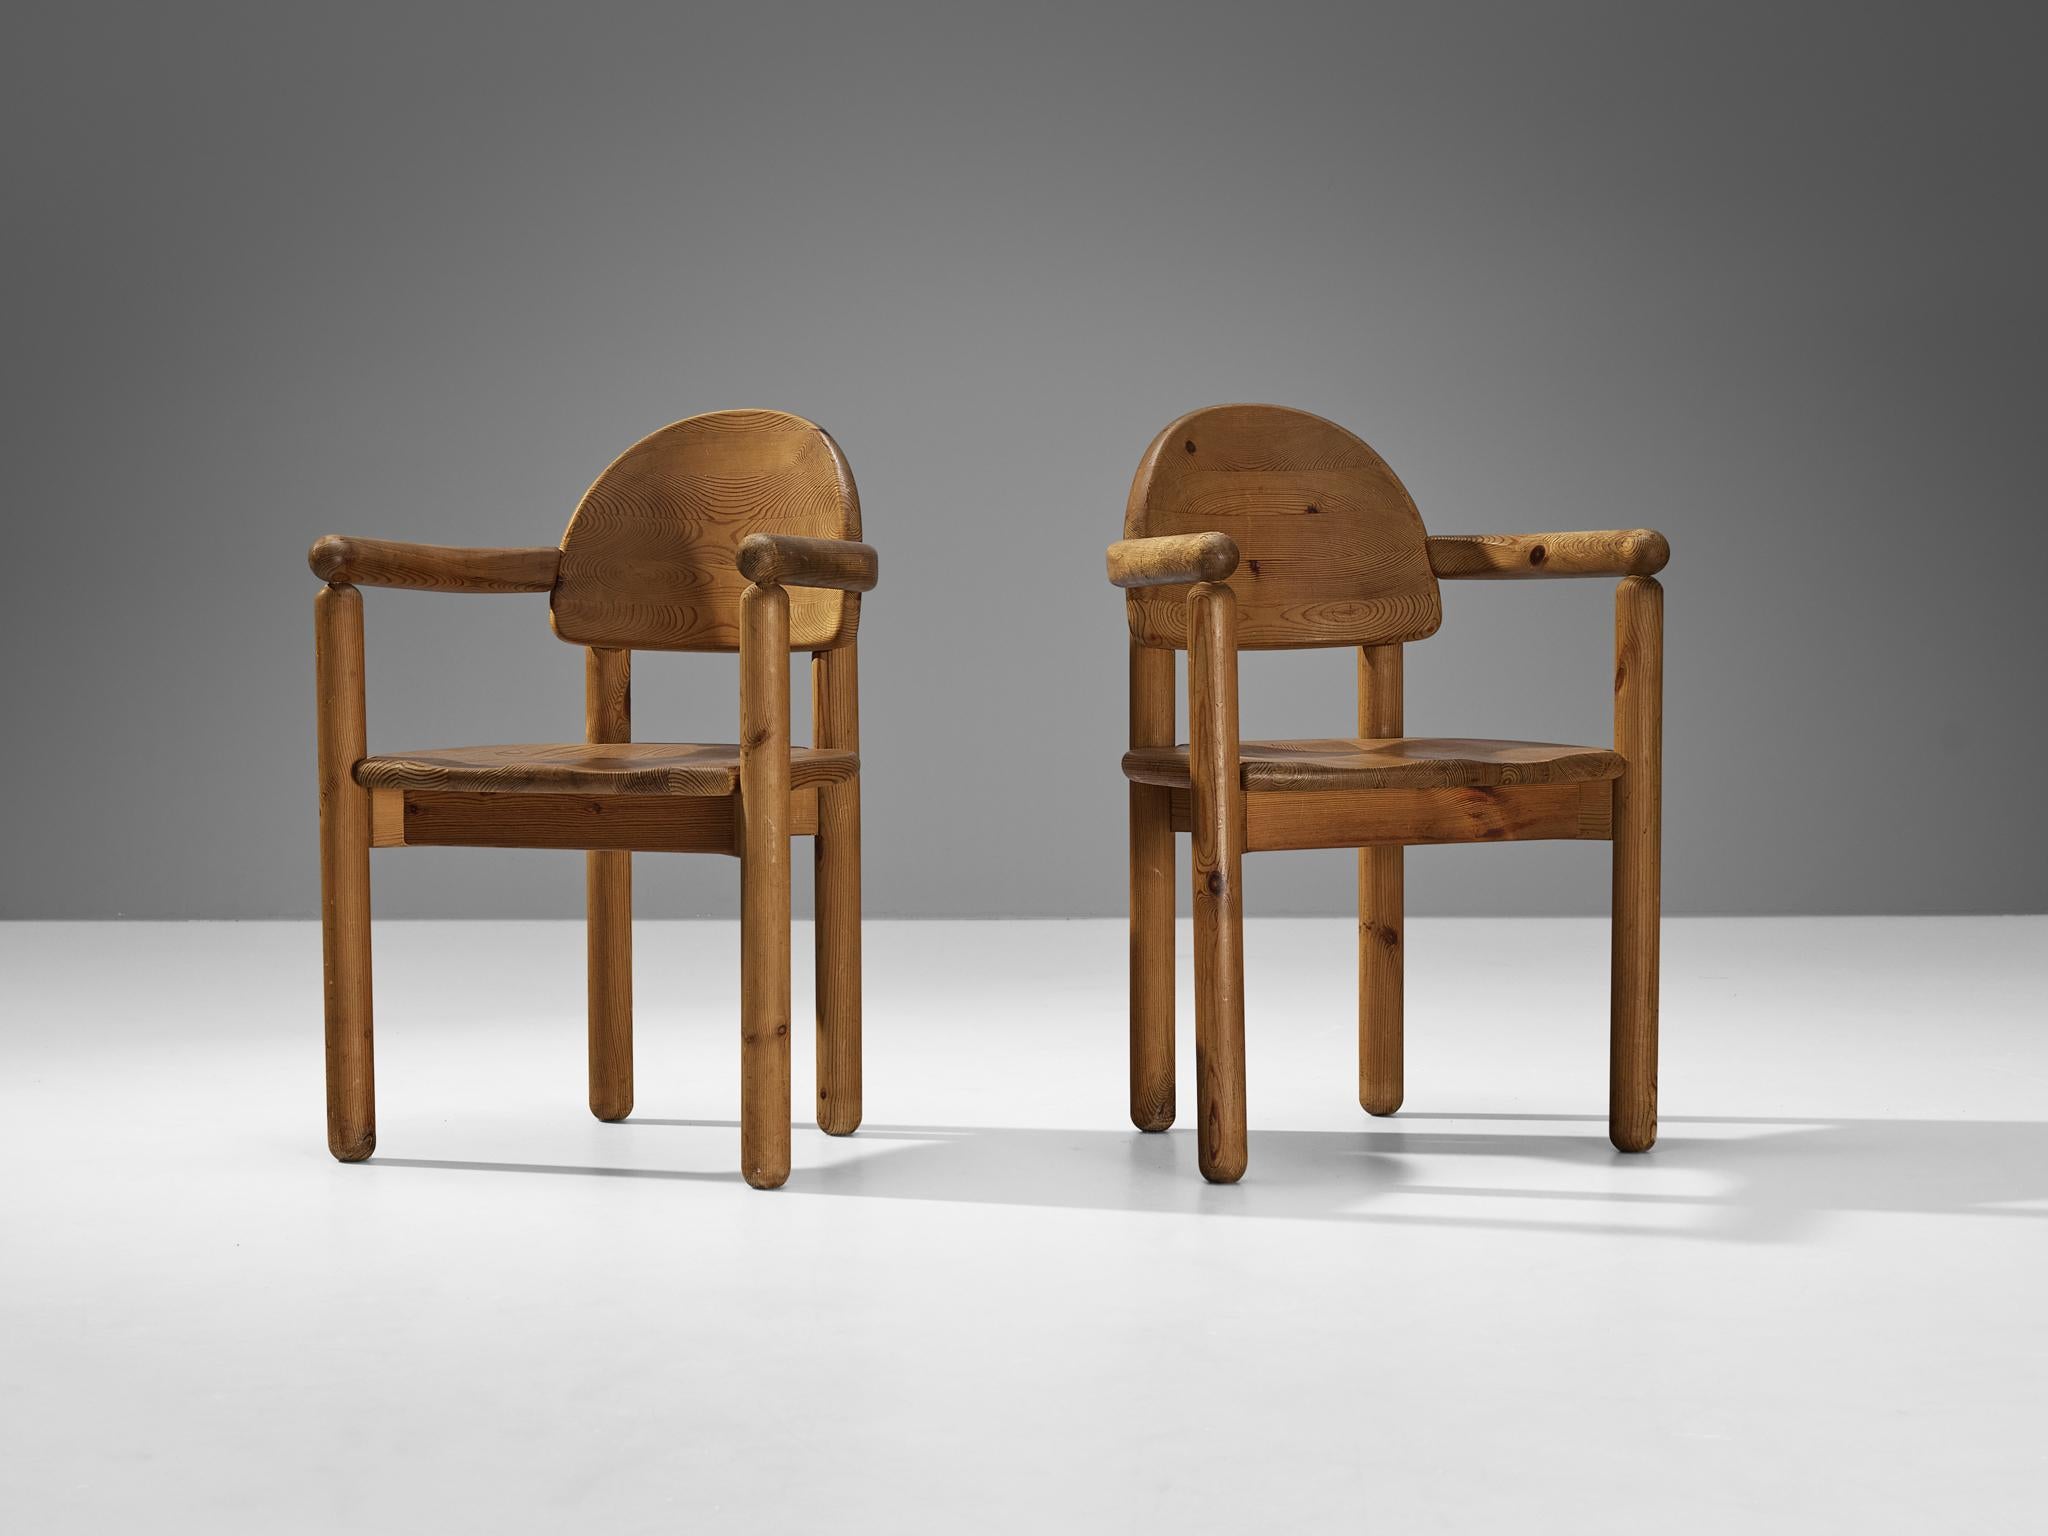 Rainer Daumiller for Hirtshals Savvaerk, pair of armchairs, pine, Denmark, 1970s.
 
These dining chairs by Danish designer Rainer Daumiller have multiple features. The vivid grain of the warm pine wood contributes to the natural expressiveness of